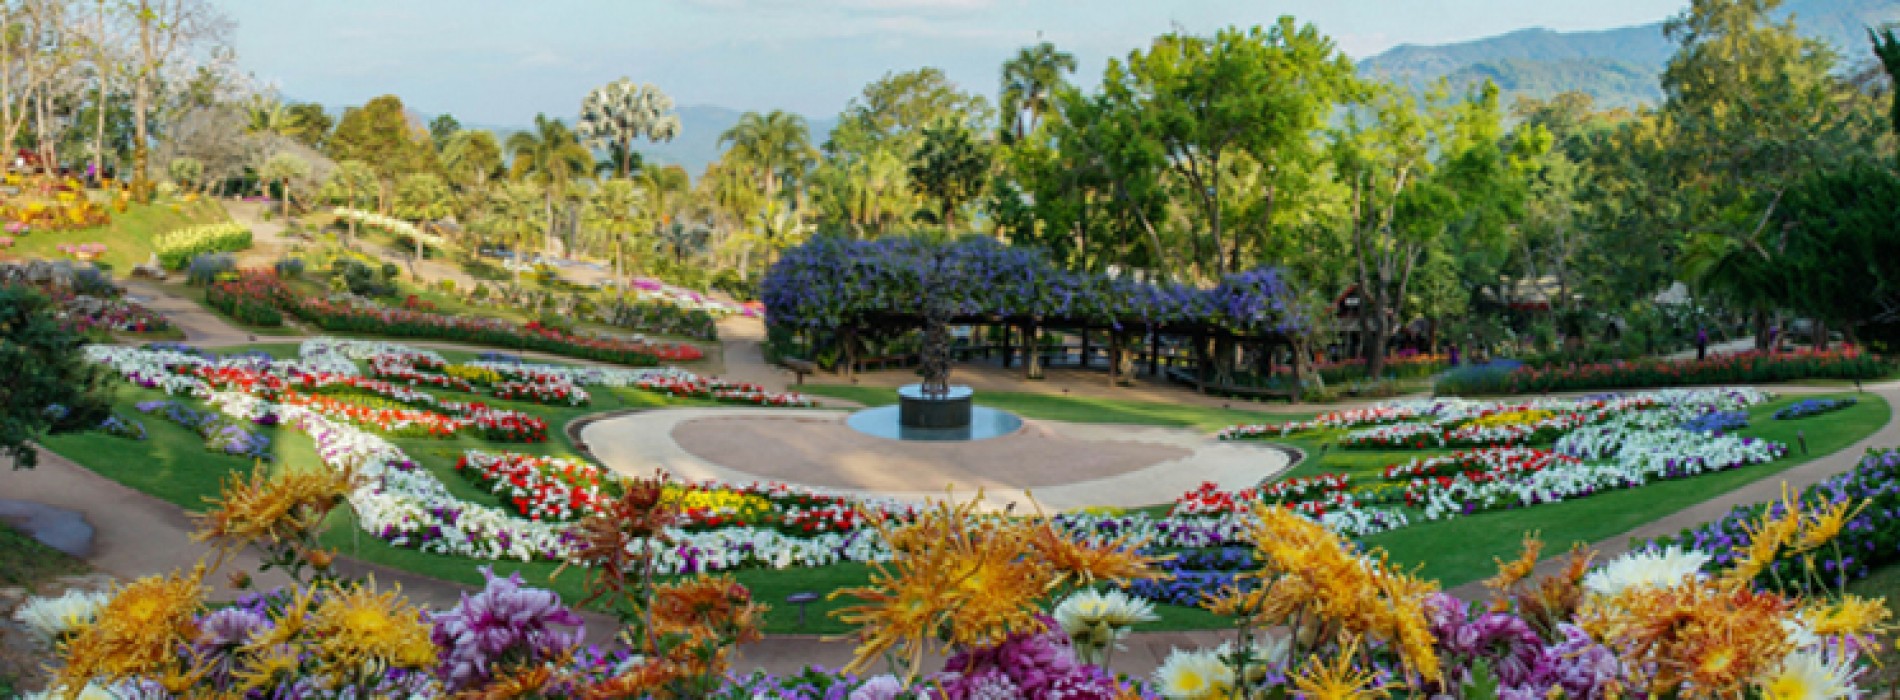 Colors of Doi Tung returns to the mountains of Chiang Rai for the second year